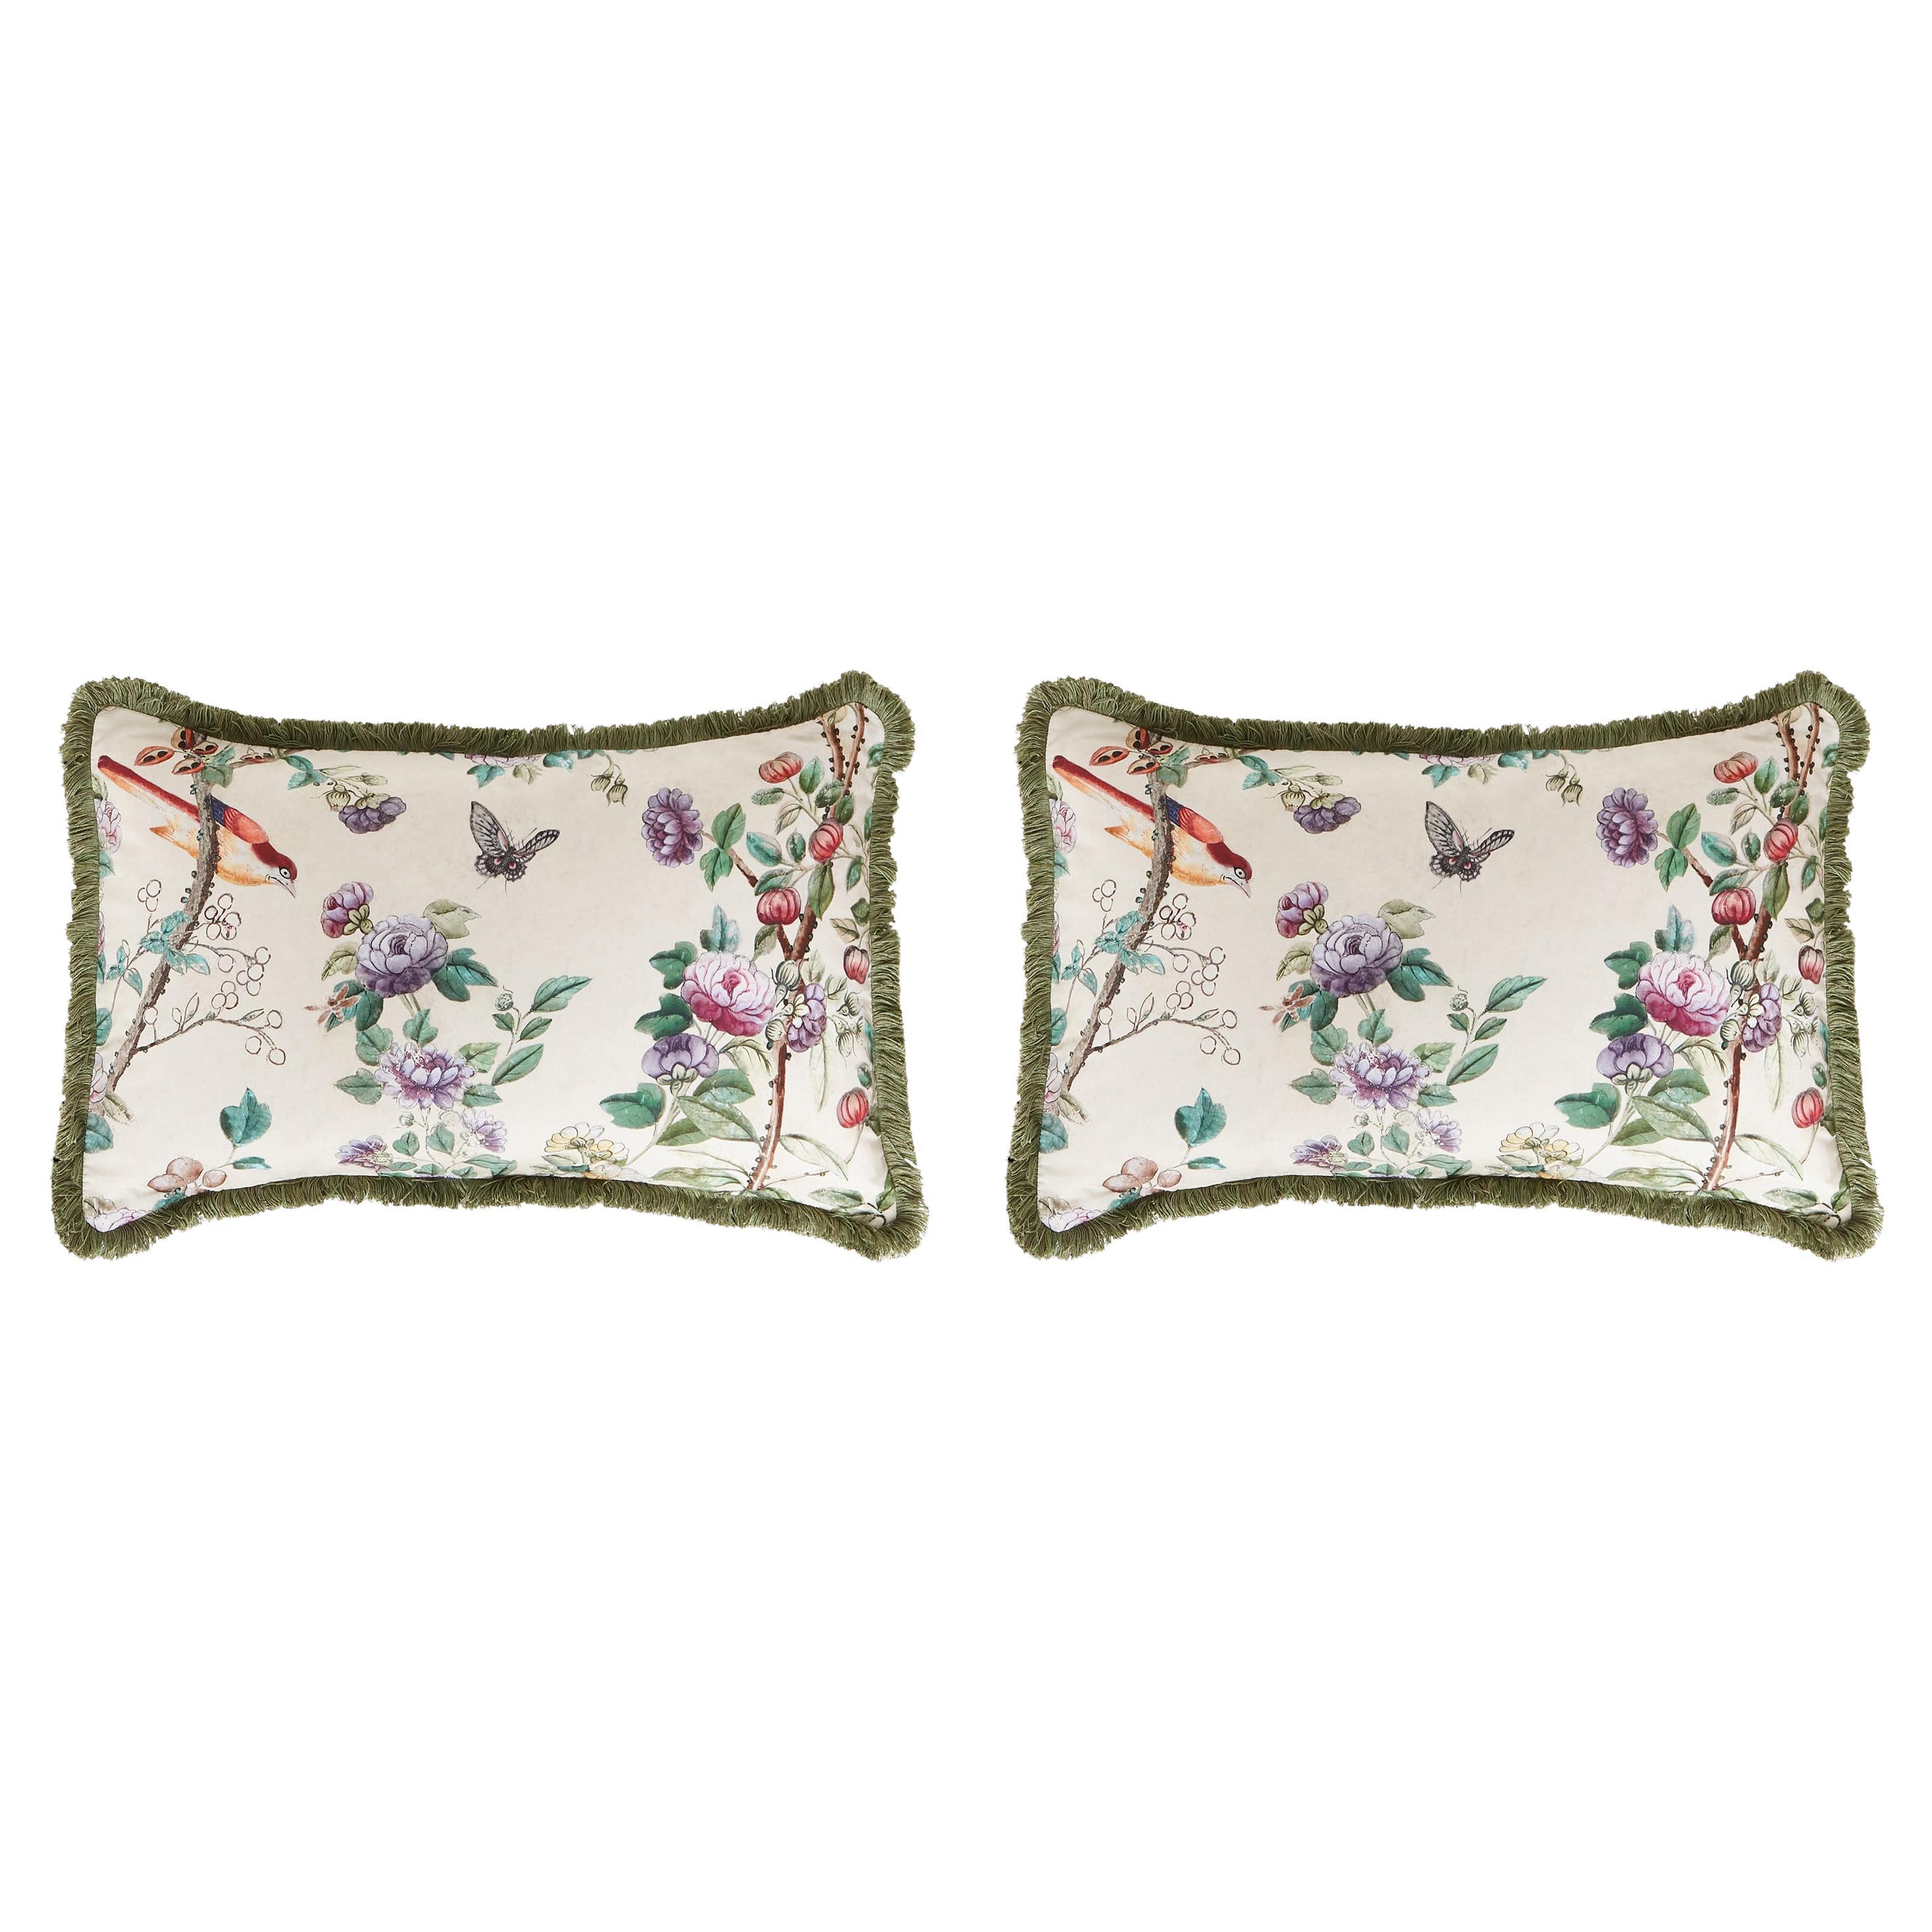 Pair of Pillow Cushions - Canton Bird Theme - Designed and Made in Paris For Sale